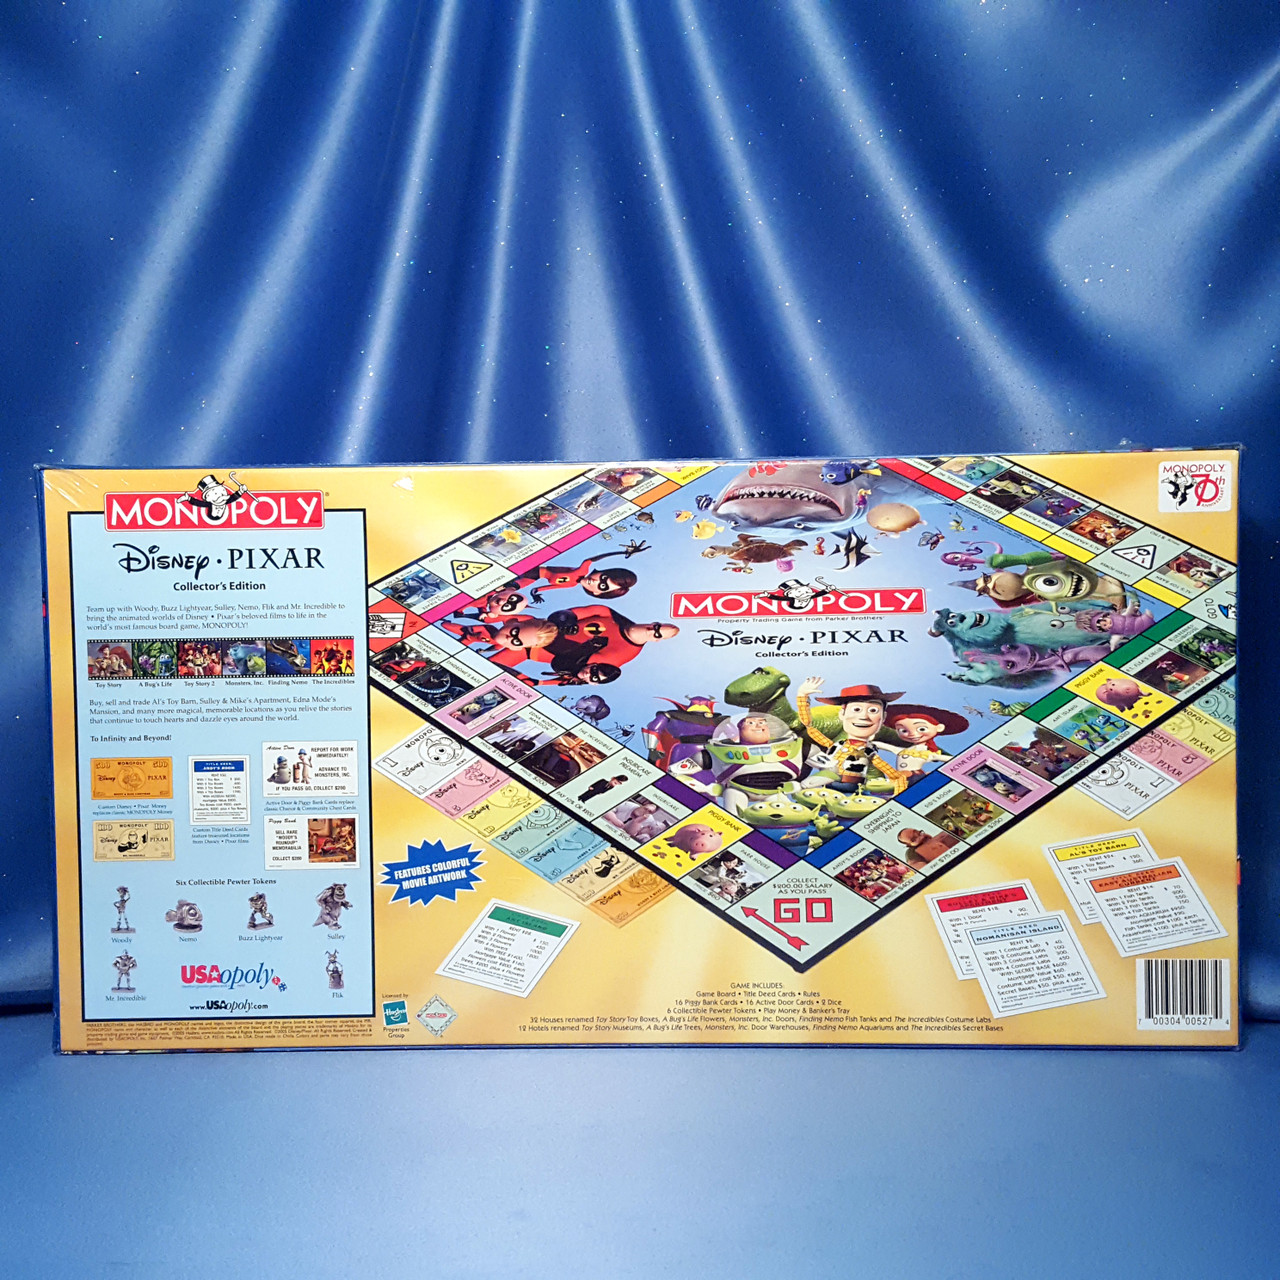 Disney Pixar Monopoly Collector's Edition by USAopoly. - Now and